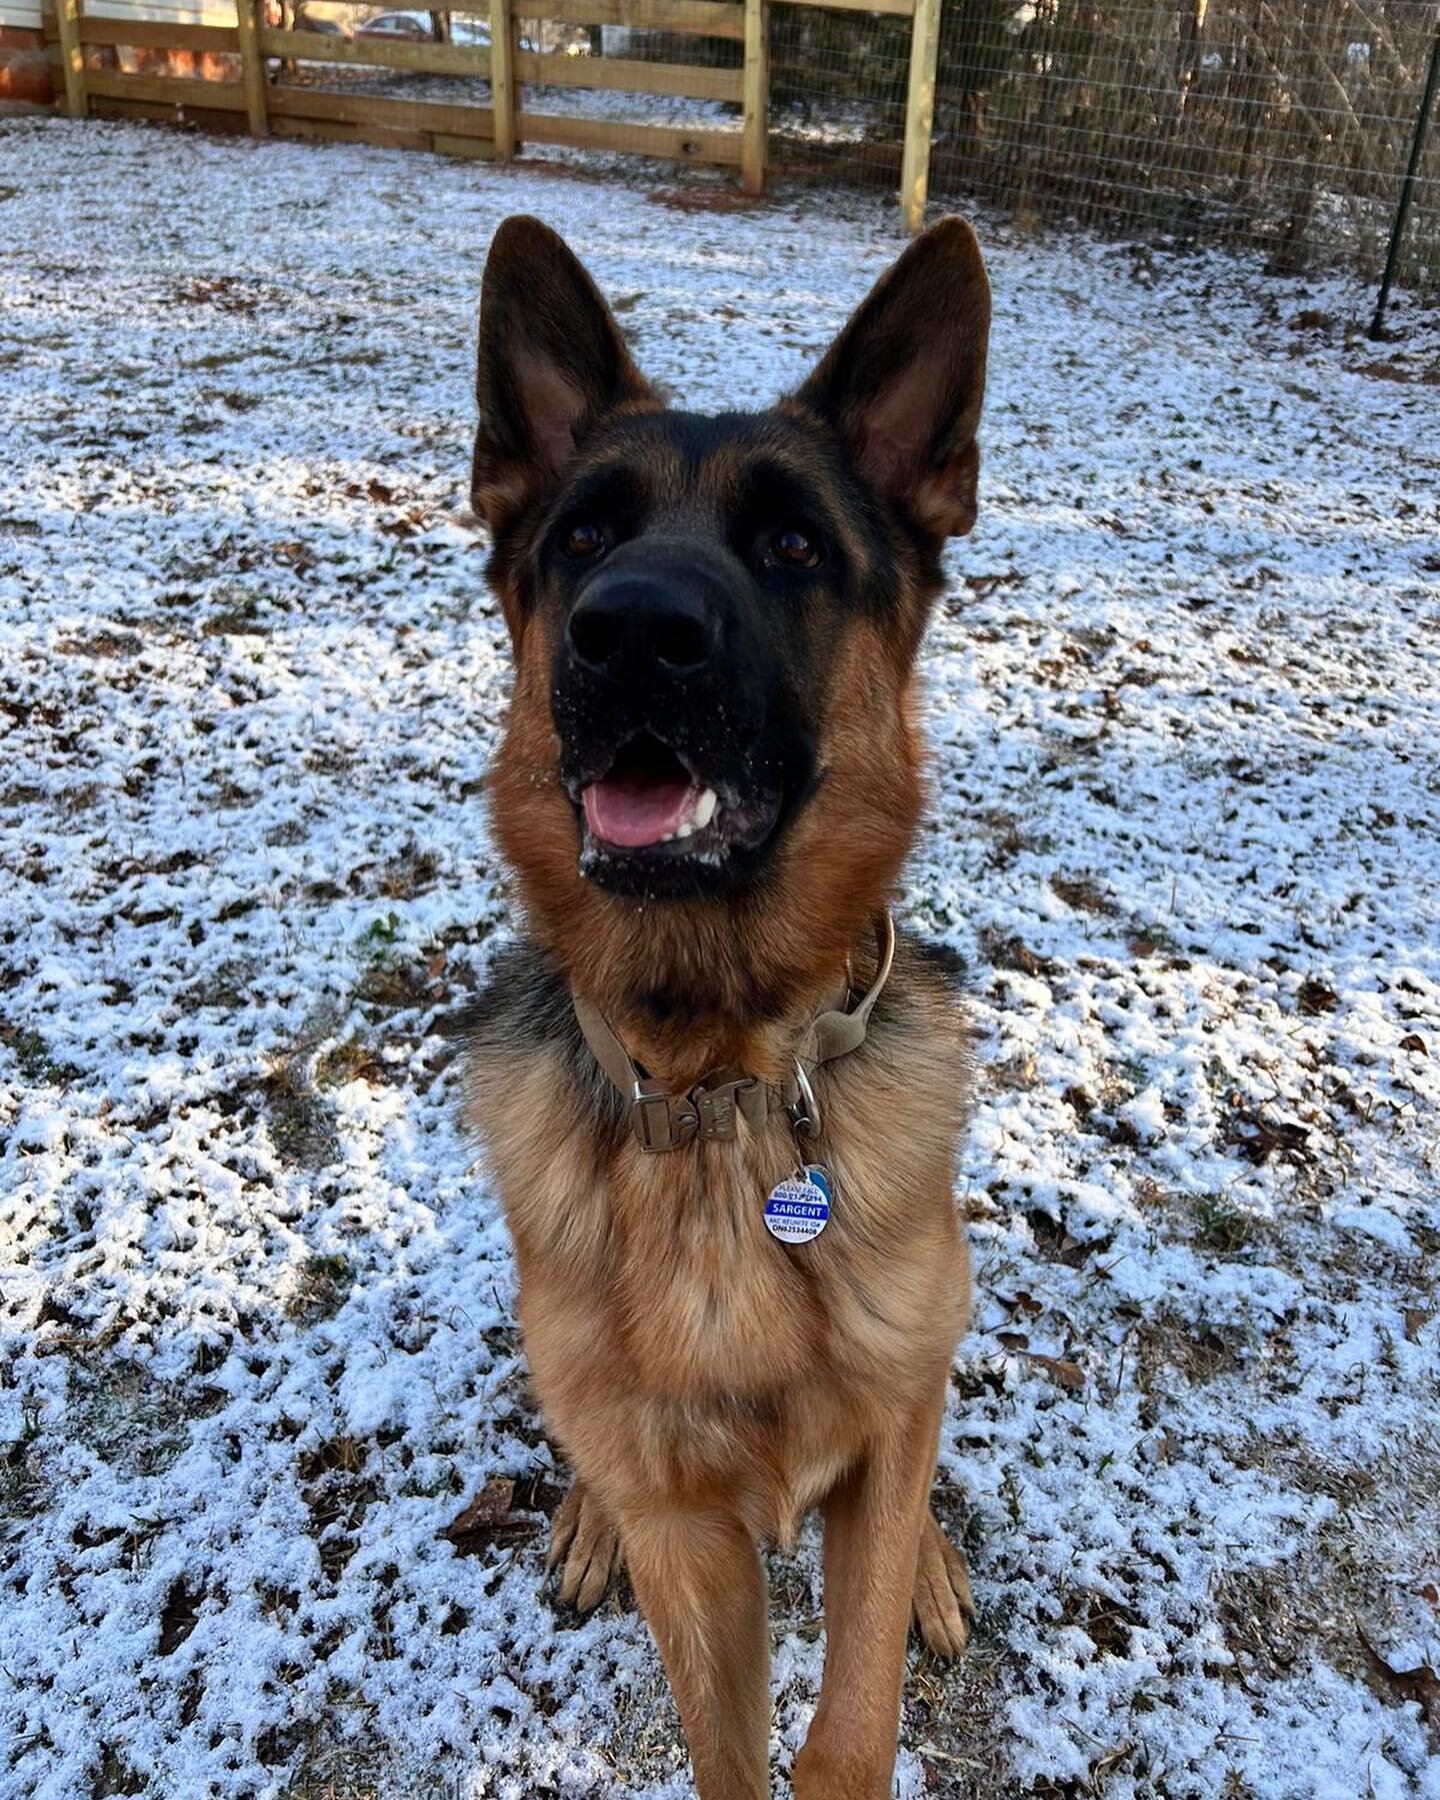 Sargent 
June 2020- May 2023

In January 2021 I had the pleasure of getting to working with Sargent, a 1.5 year old German Shepherd at the time. He was so sweet and outgoing. And with a little bit of boundaries put in to place, lots of play, and conf